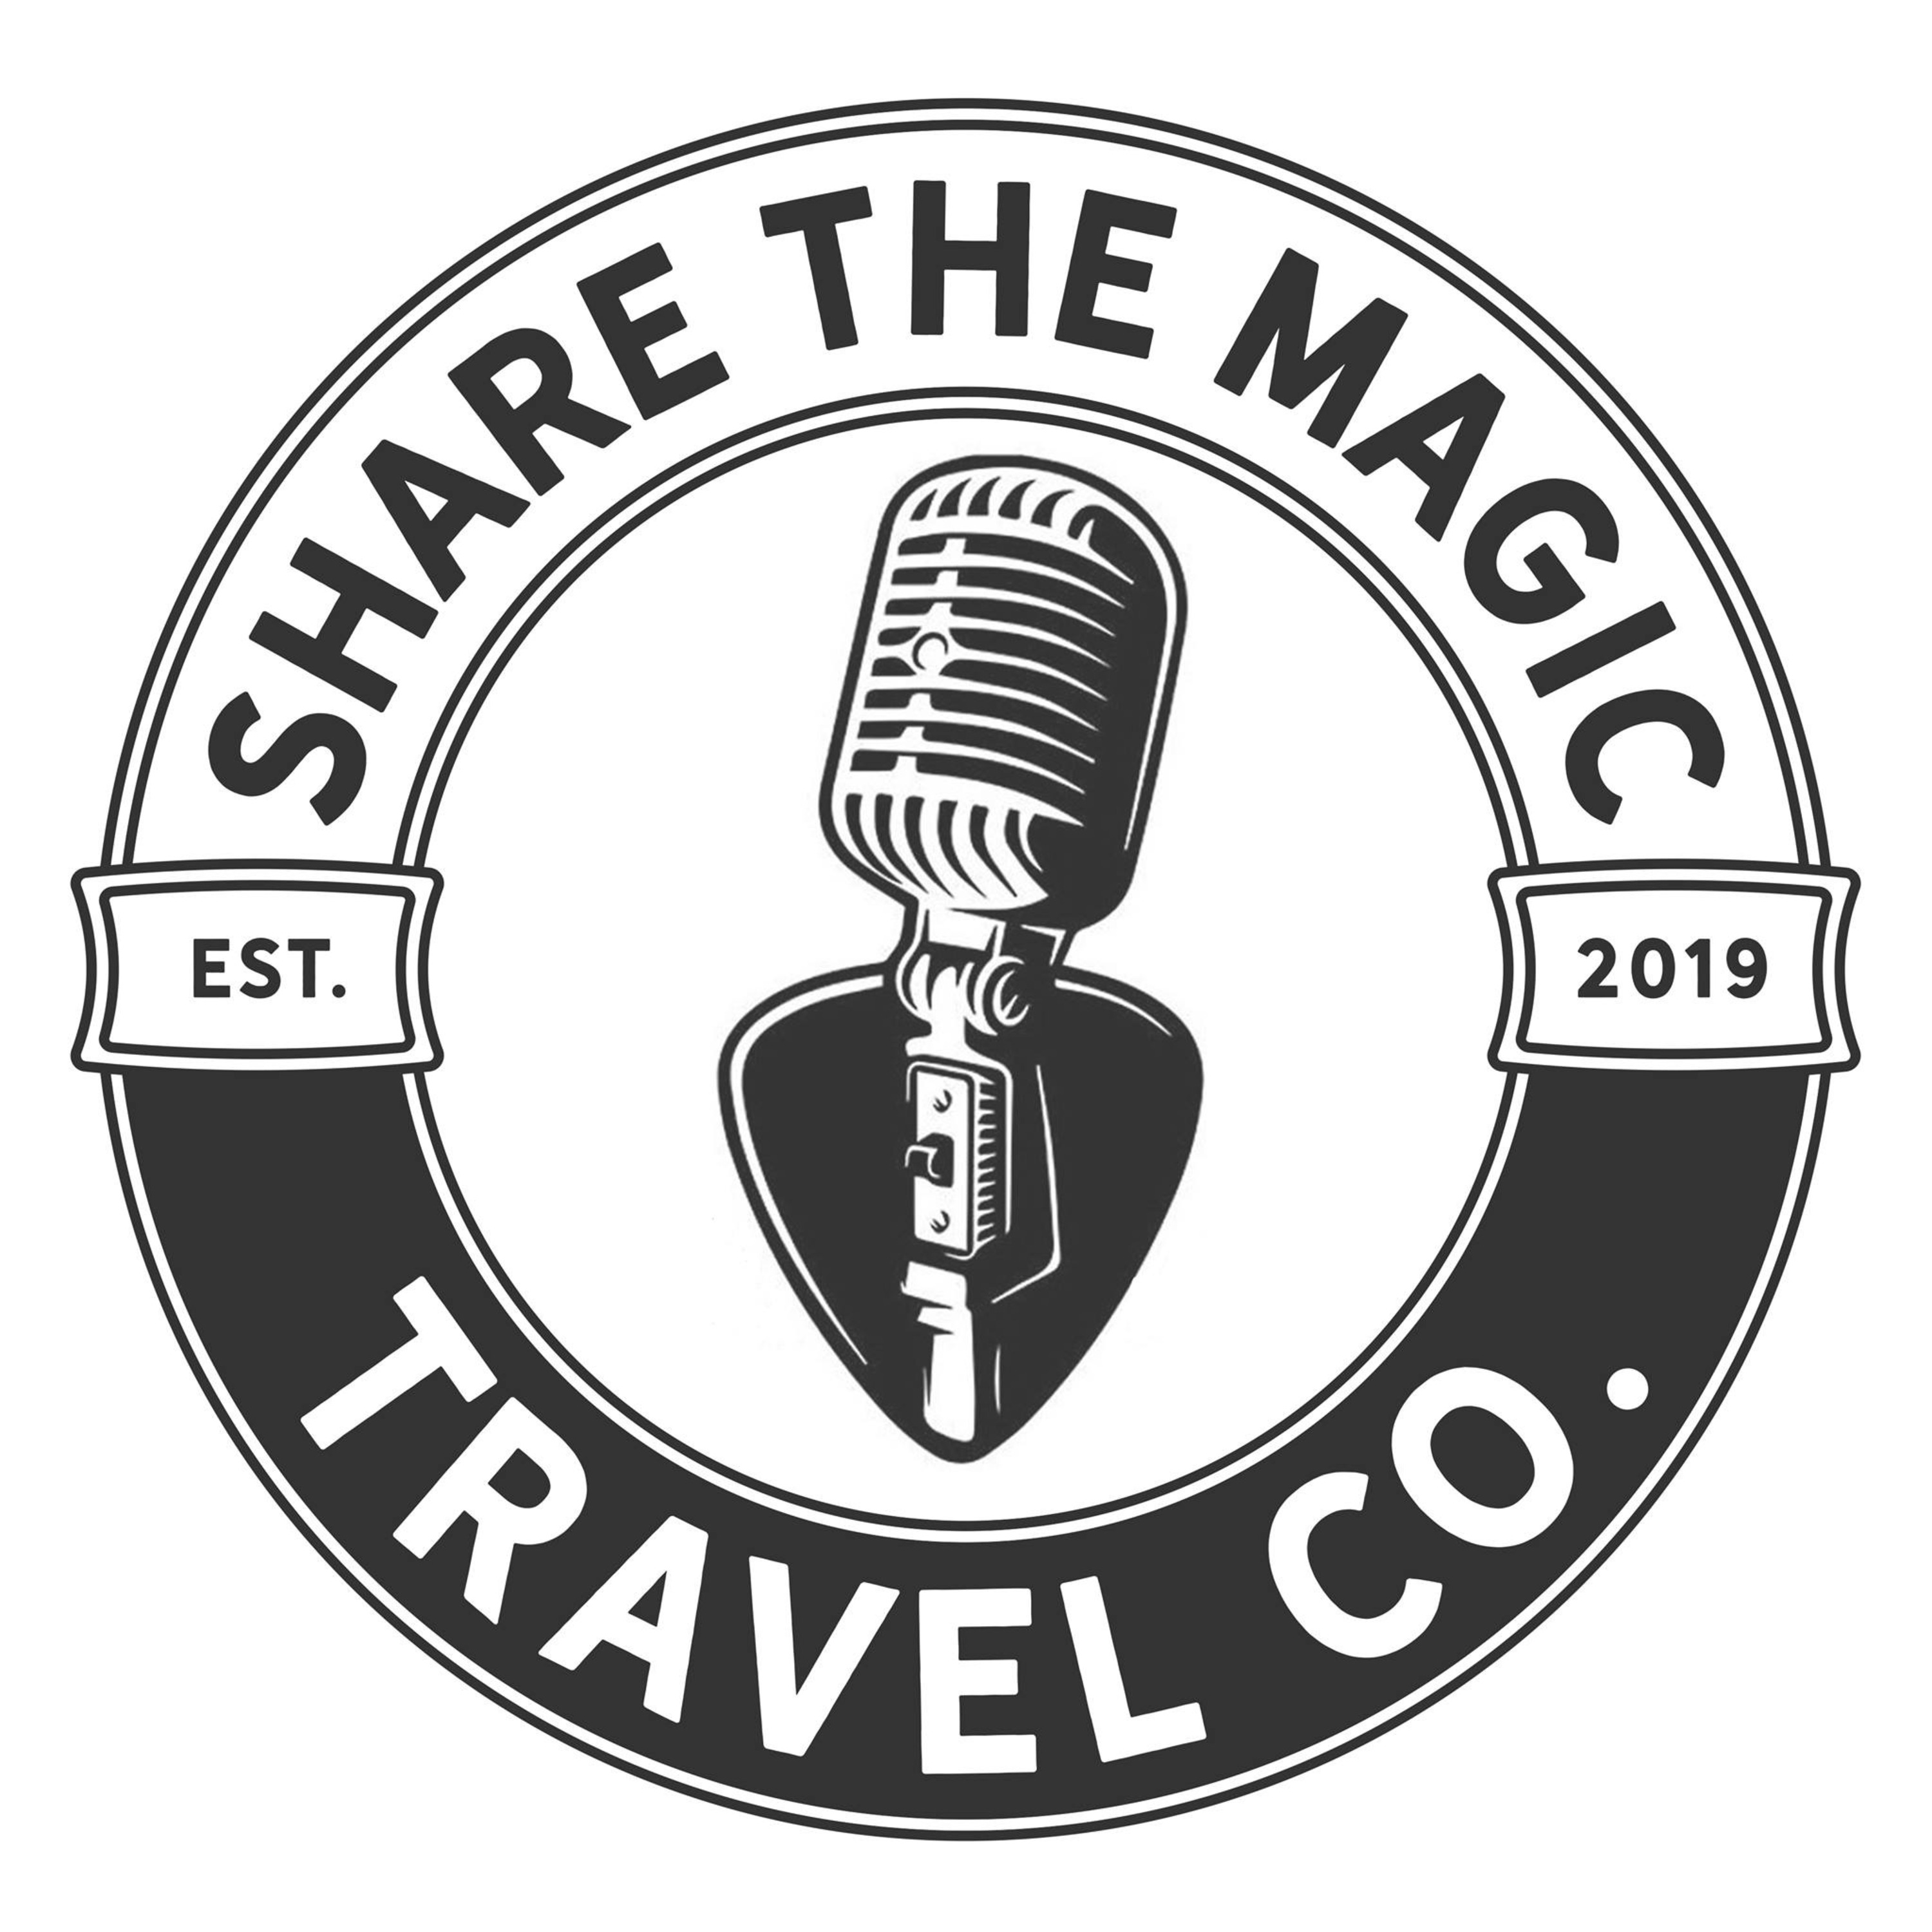 Episode 40: Where Should You Stay at Walt Disney World